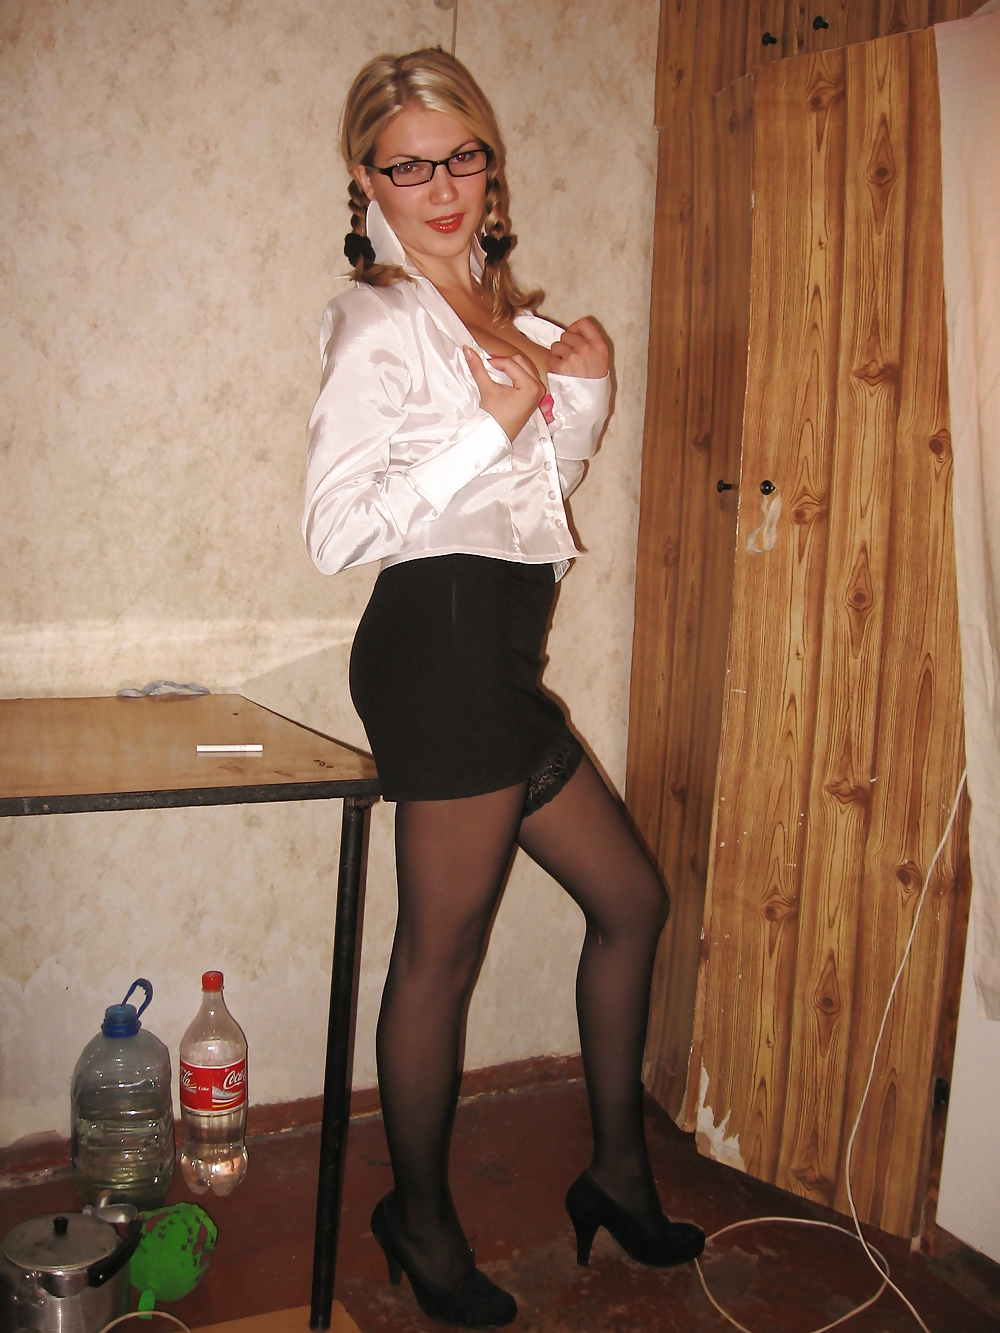 Sex Blonde russian girl image